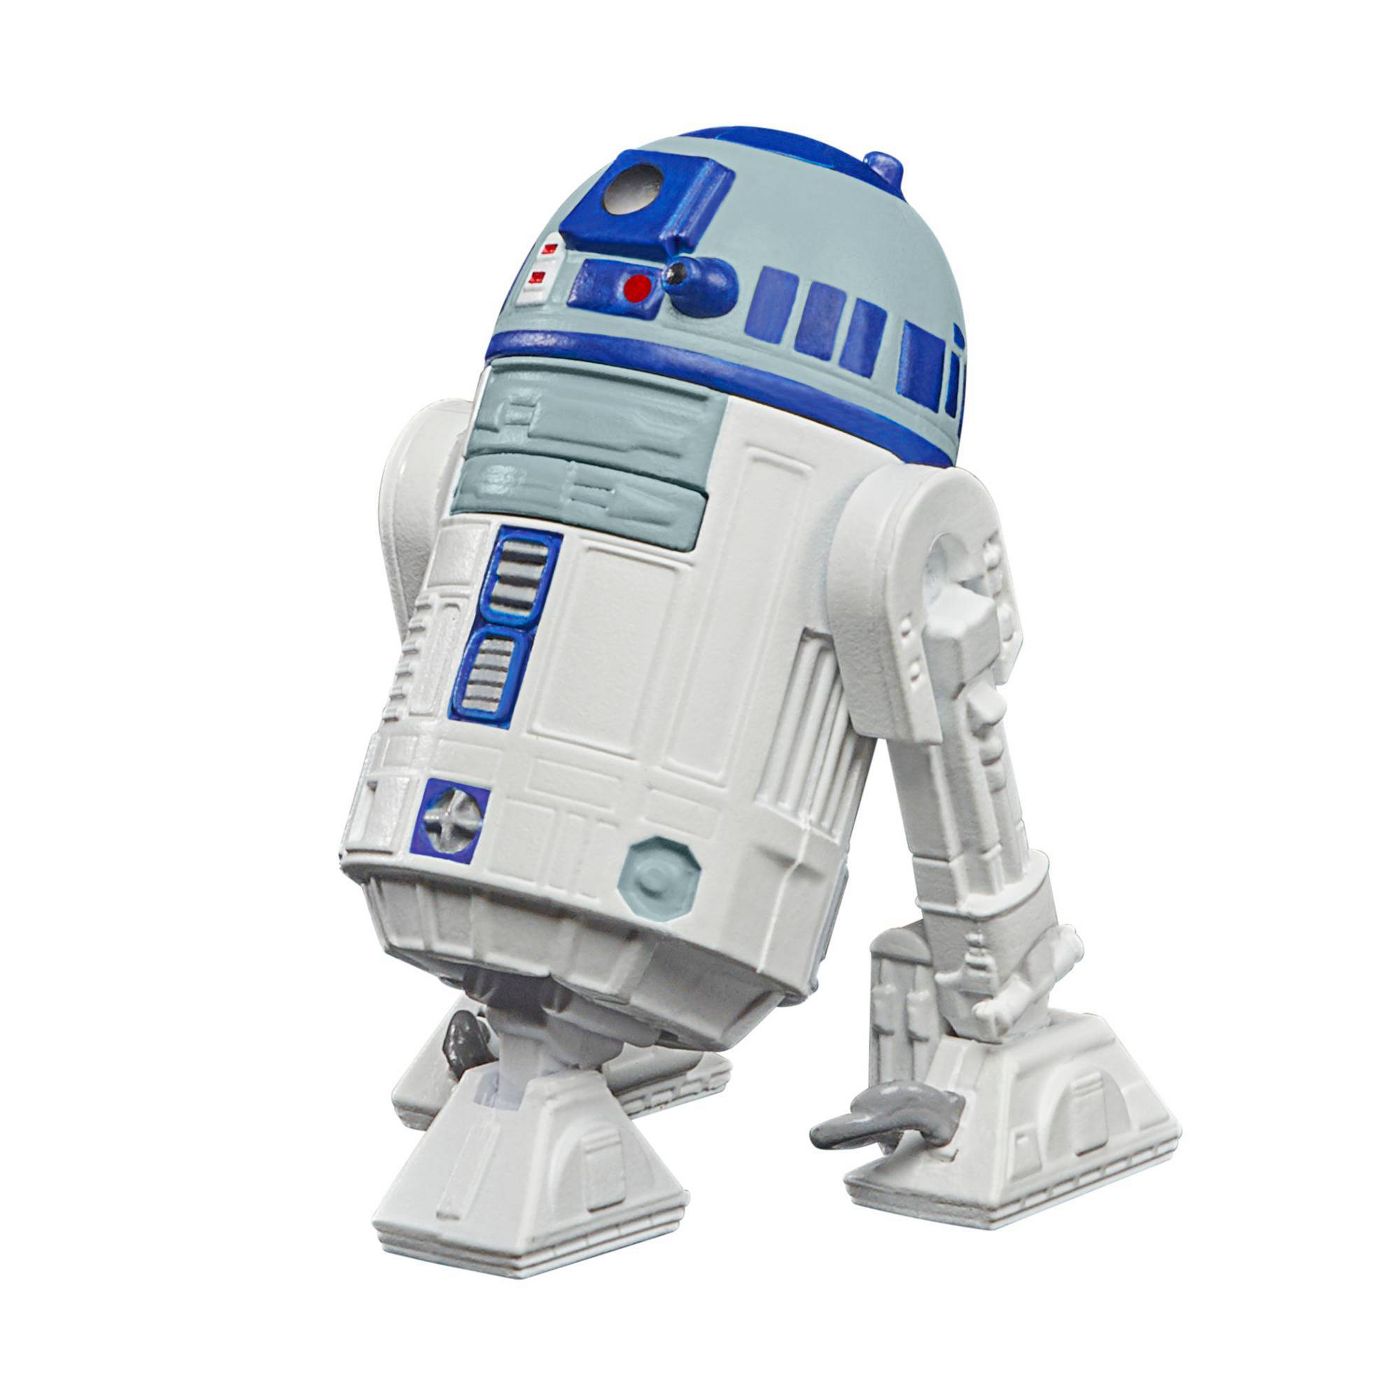 Hasbro Celebrates The 1985 Star Wars Droids Tv Series With New Figures